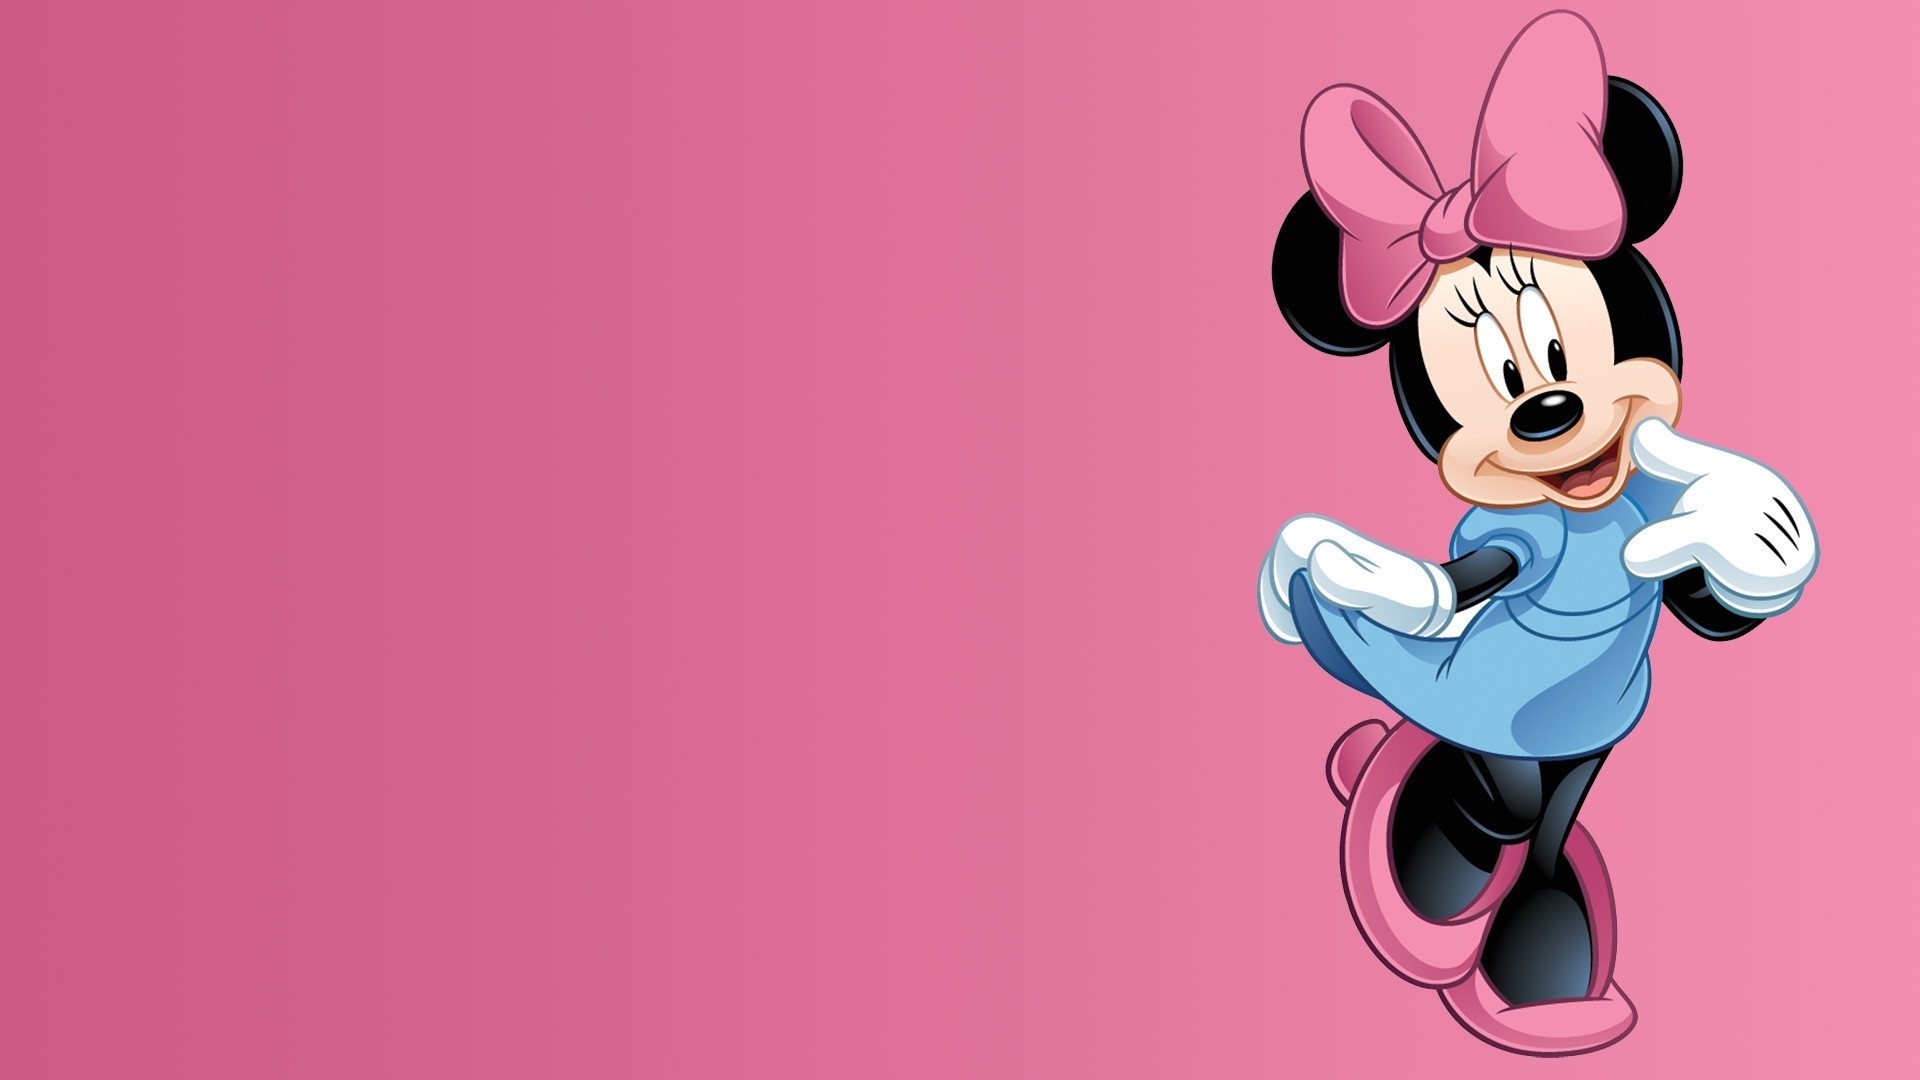 1920x1080  2 Mickey Mouse HD Wallpapers | Backgrounds - Wallpaper Abyss .